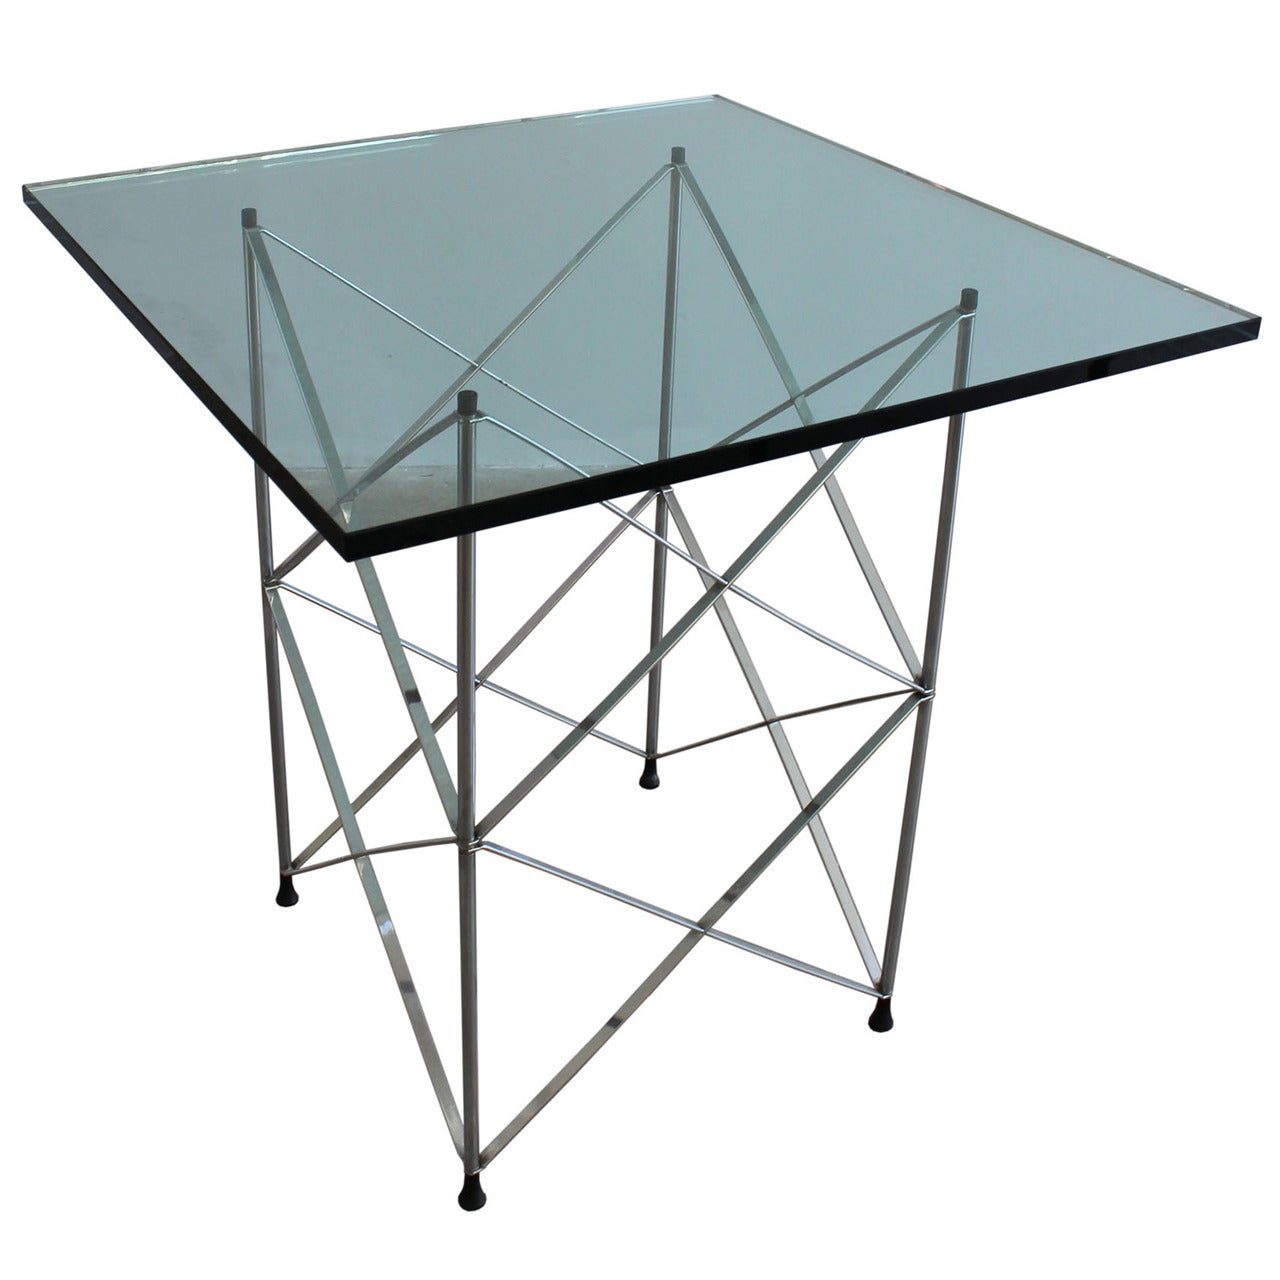 Pace Scaffold Table For Sale